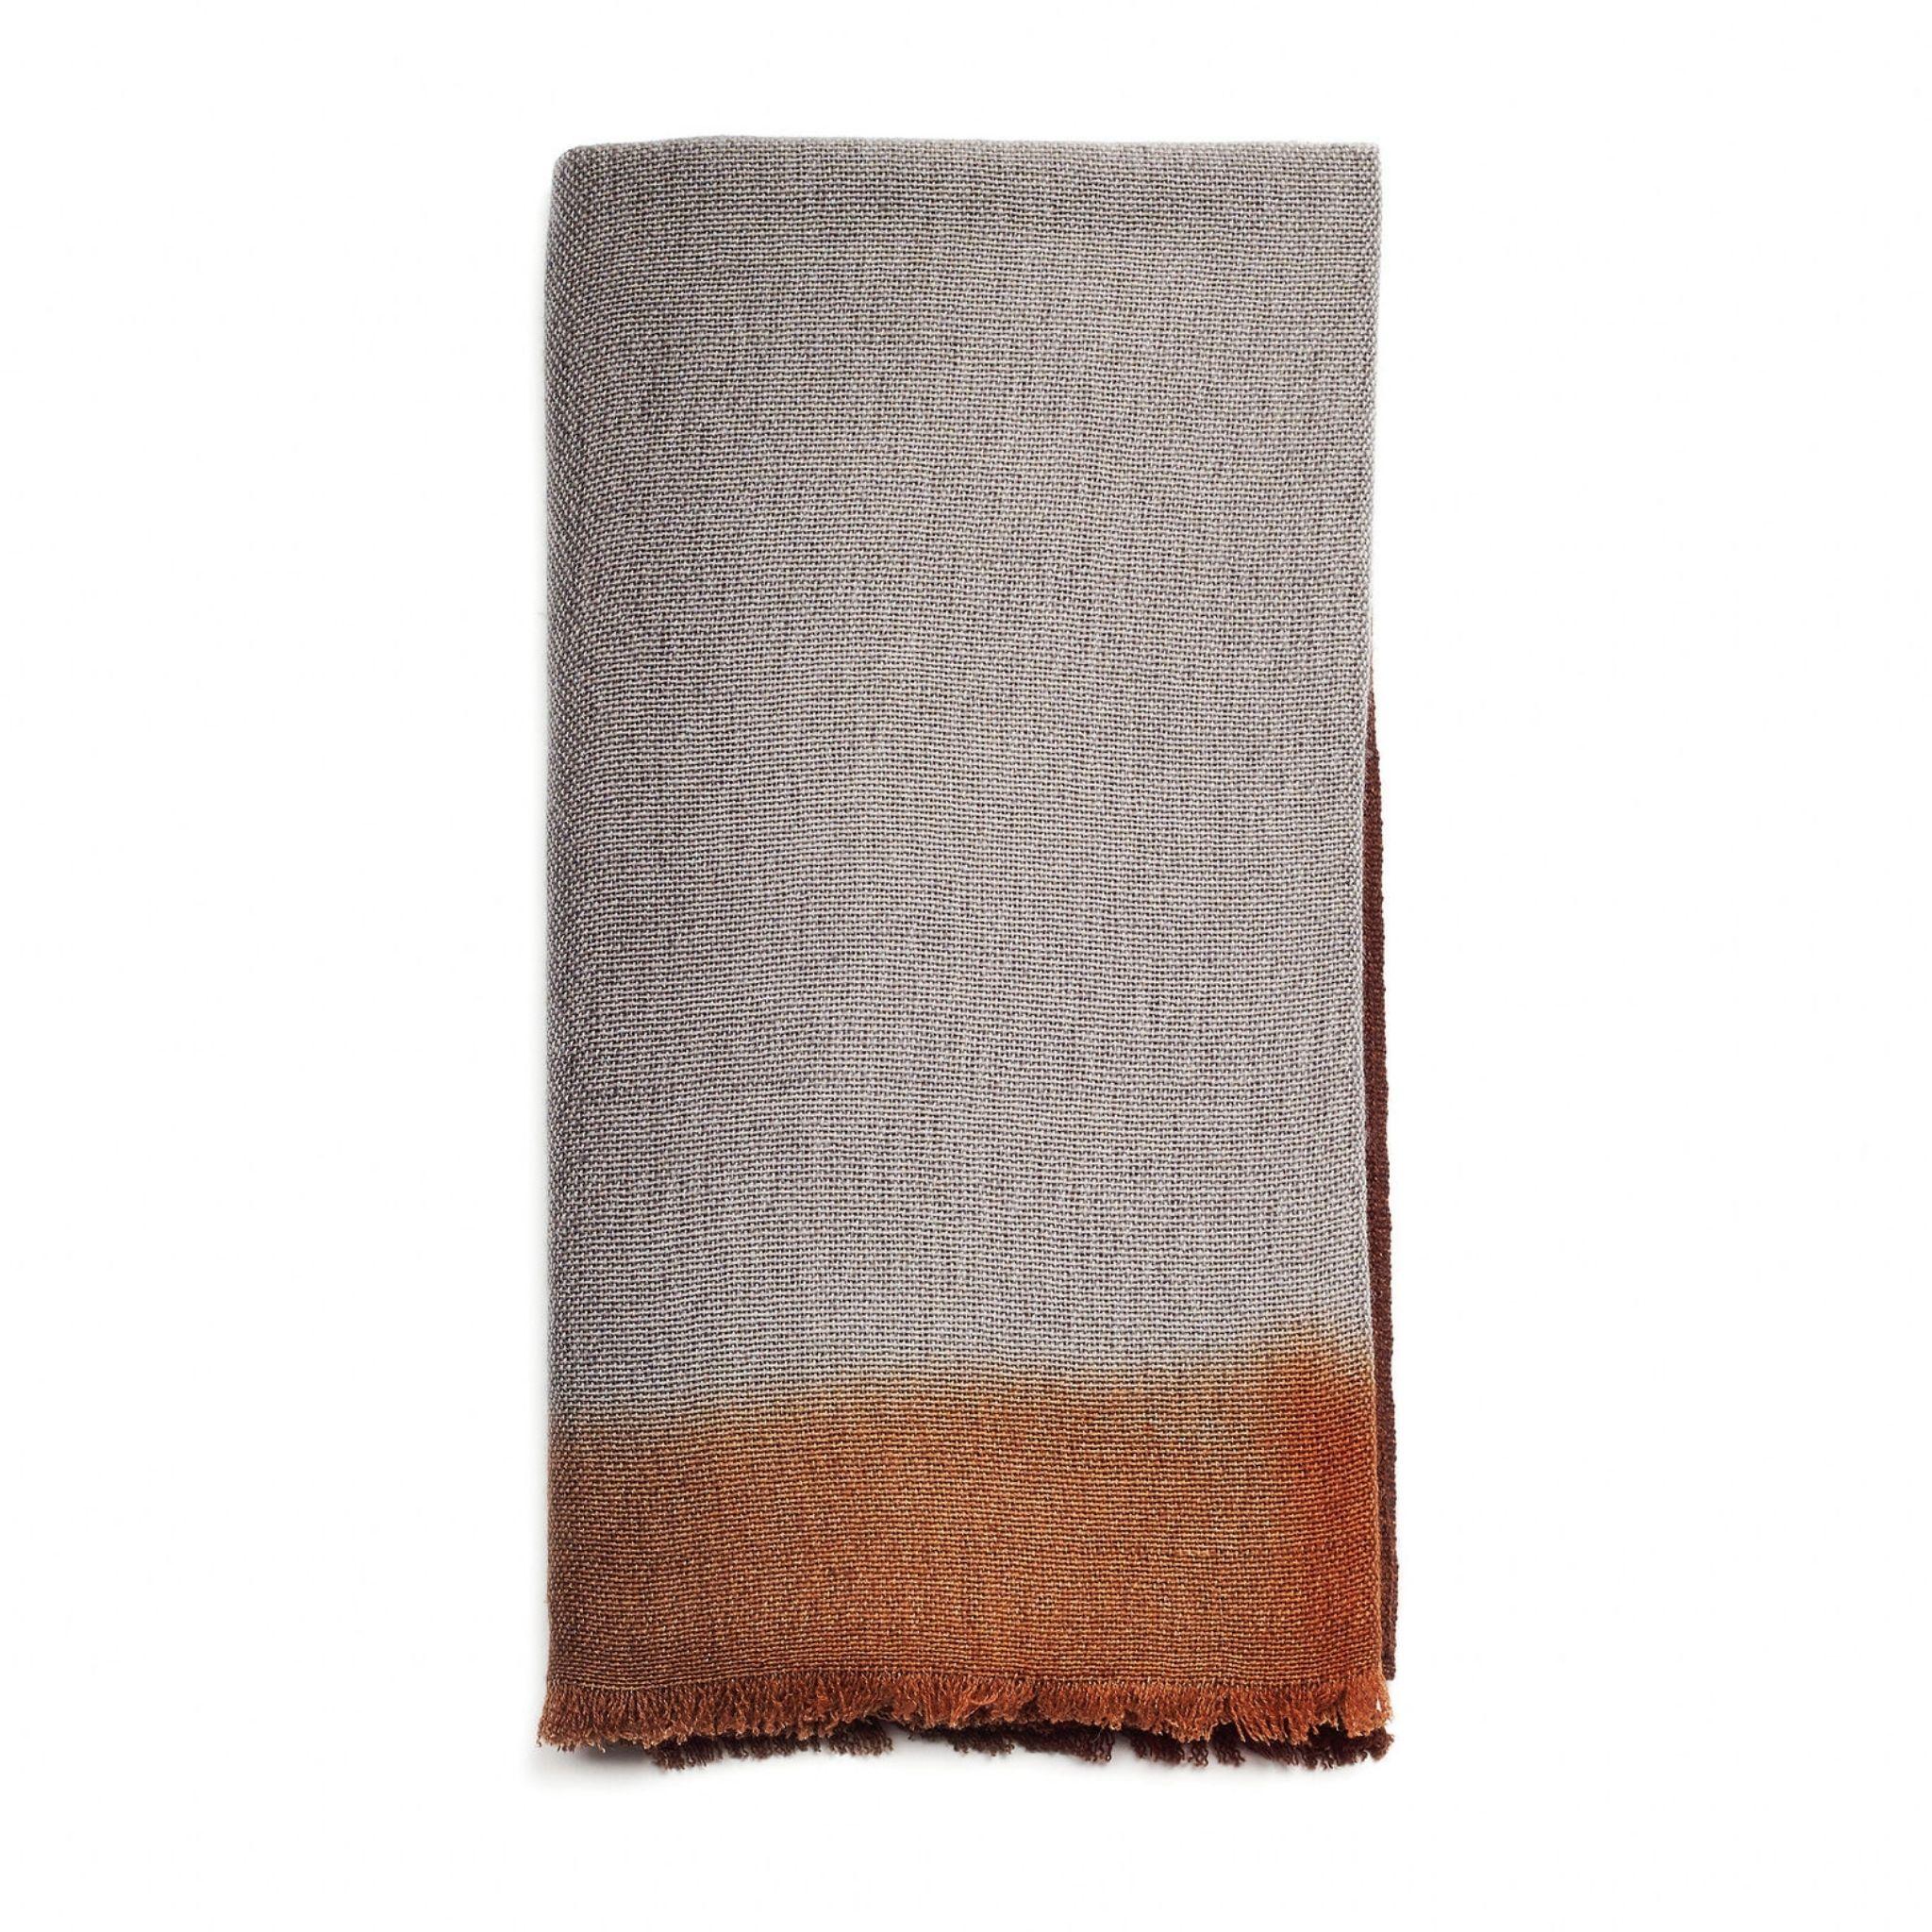 Contemporary Simply Taupe Merino Throw Handwoven in Hand-spun Merino Using Warm Ombre Hues For Sale